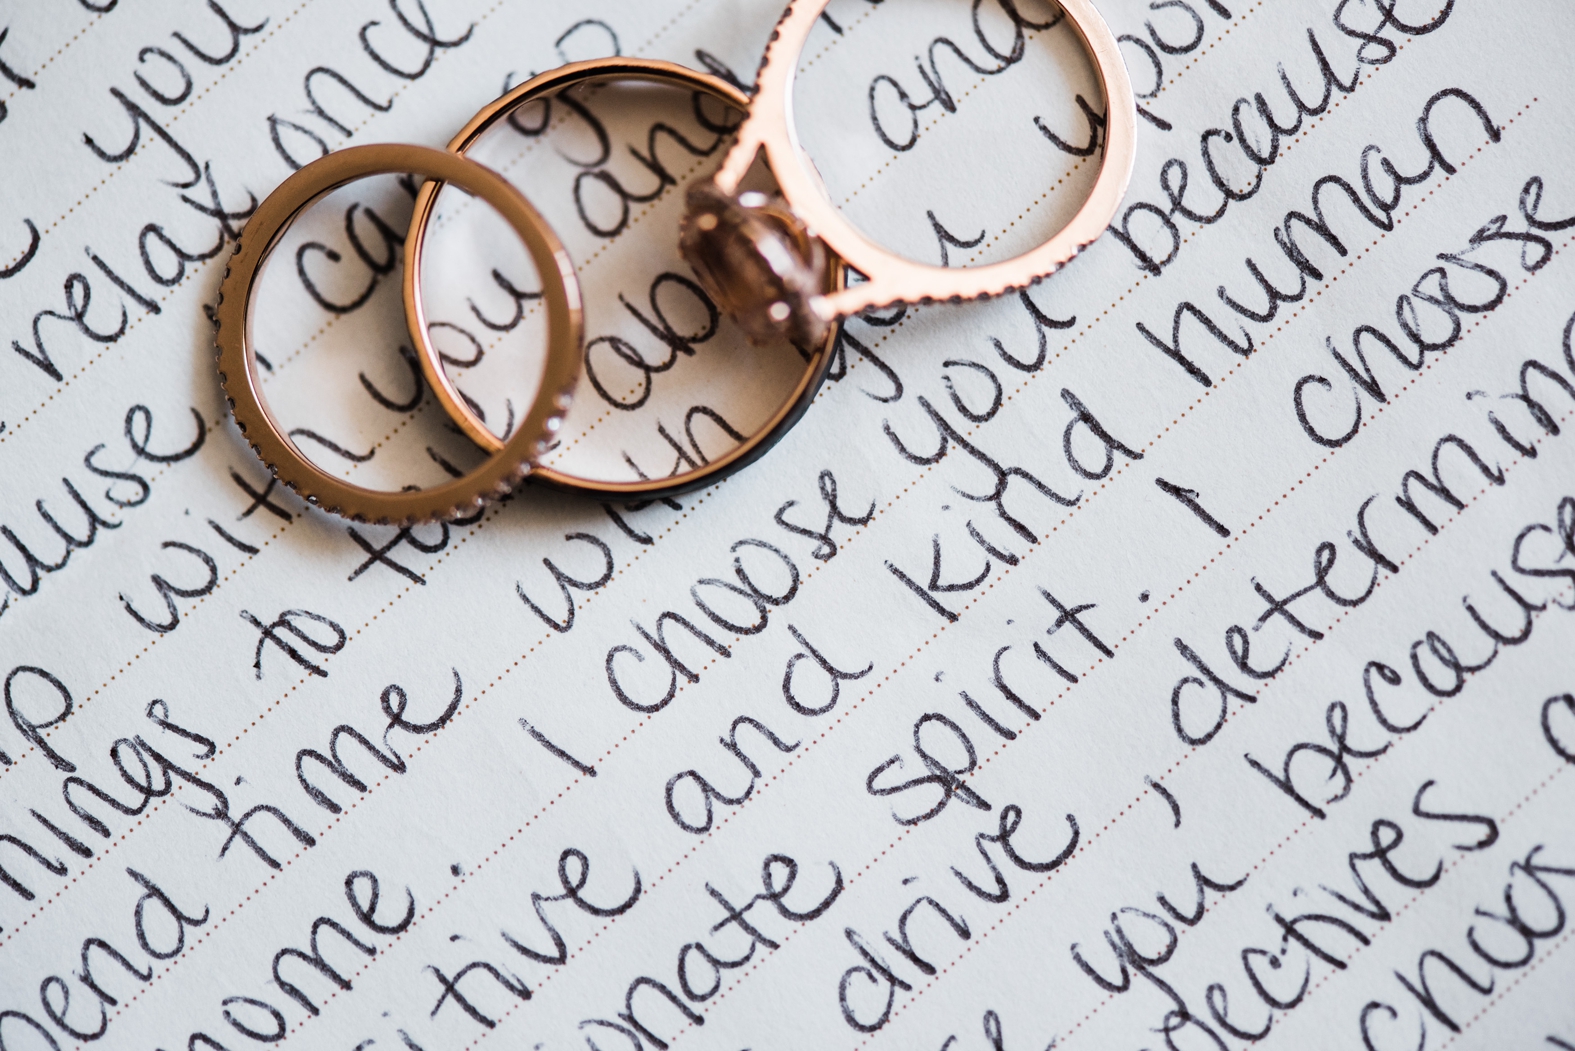 Wedding rings in rose gold, gold, and morganite on handwritten wedding vows.